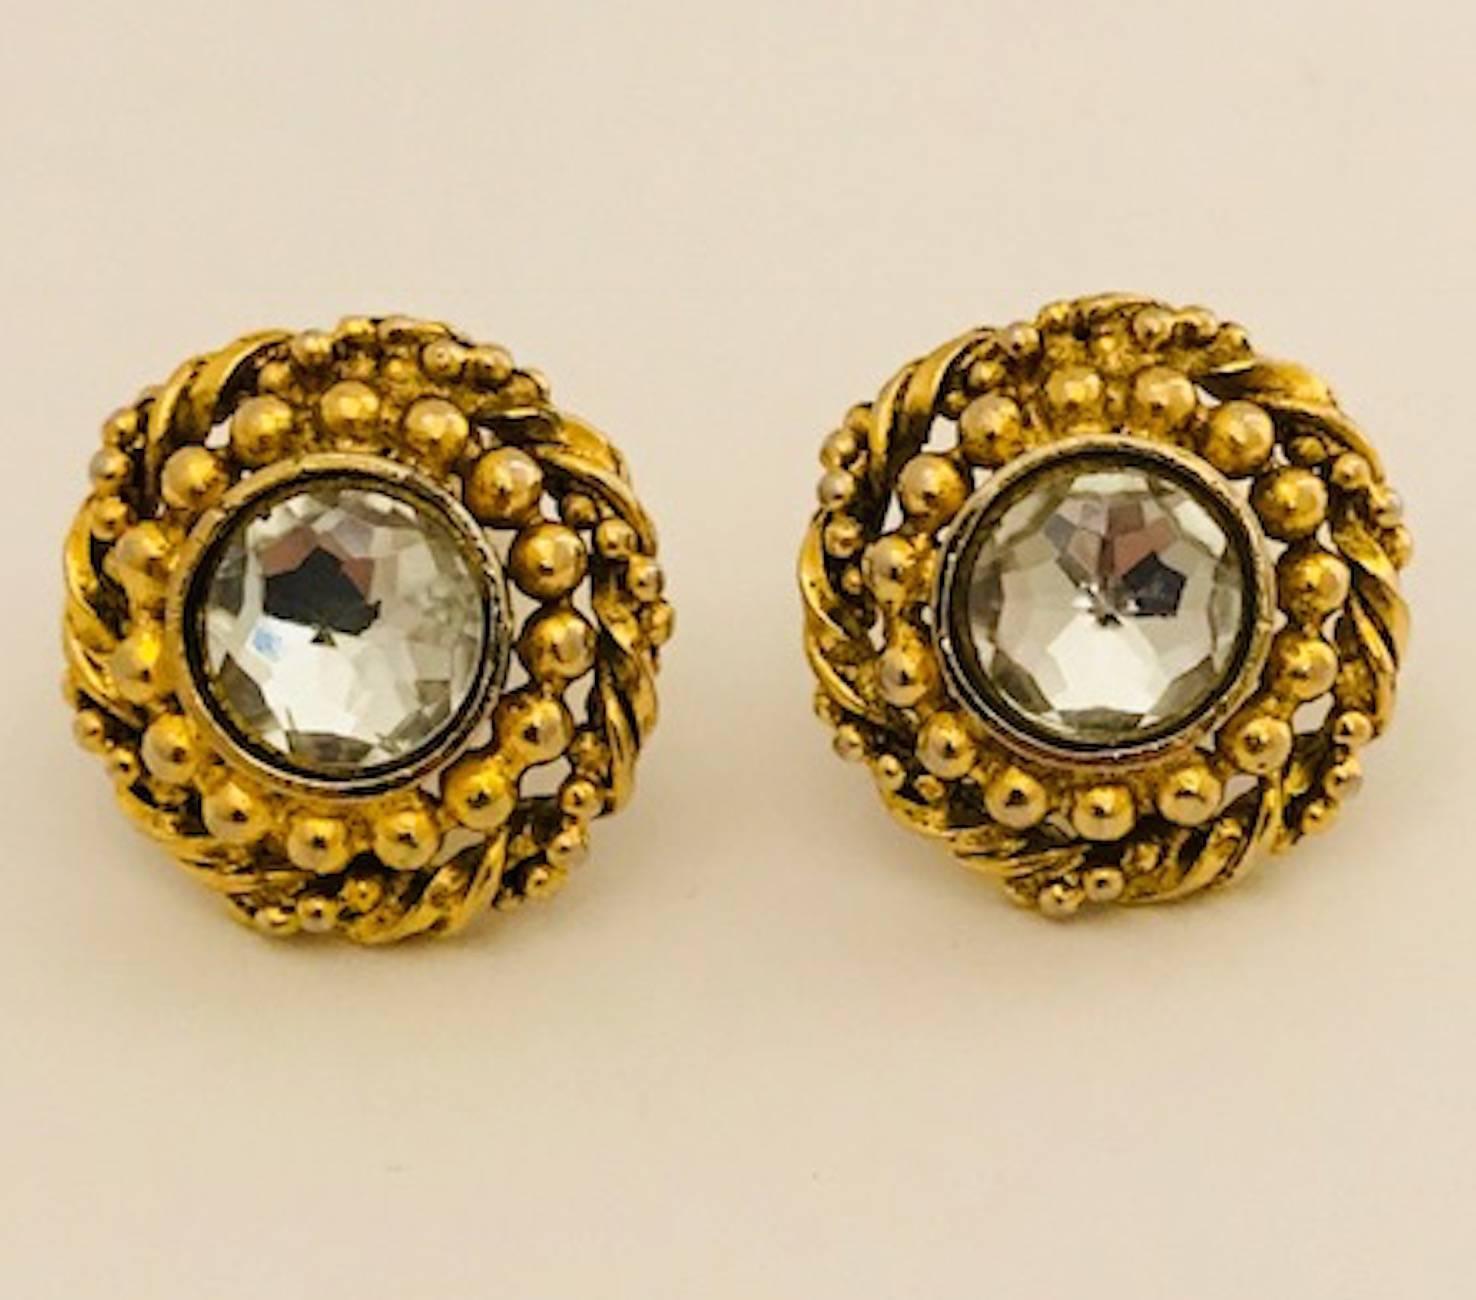 A very nice pair of 1970 to 1980 Chanel button clip earrings featuring a twisted rope with bead design setting with central faceted dome crystal stone. Each earring measures one inch in diameter. Very good condition with no wear to the gold plate.